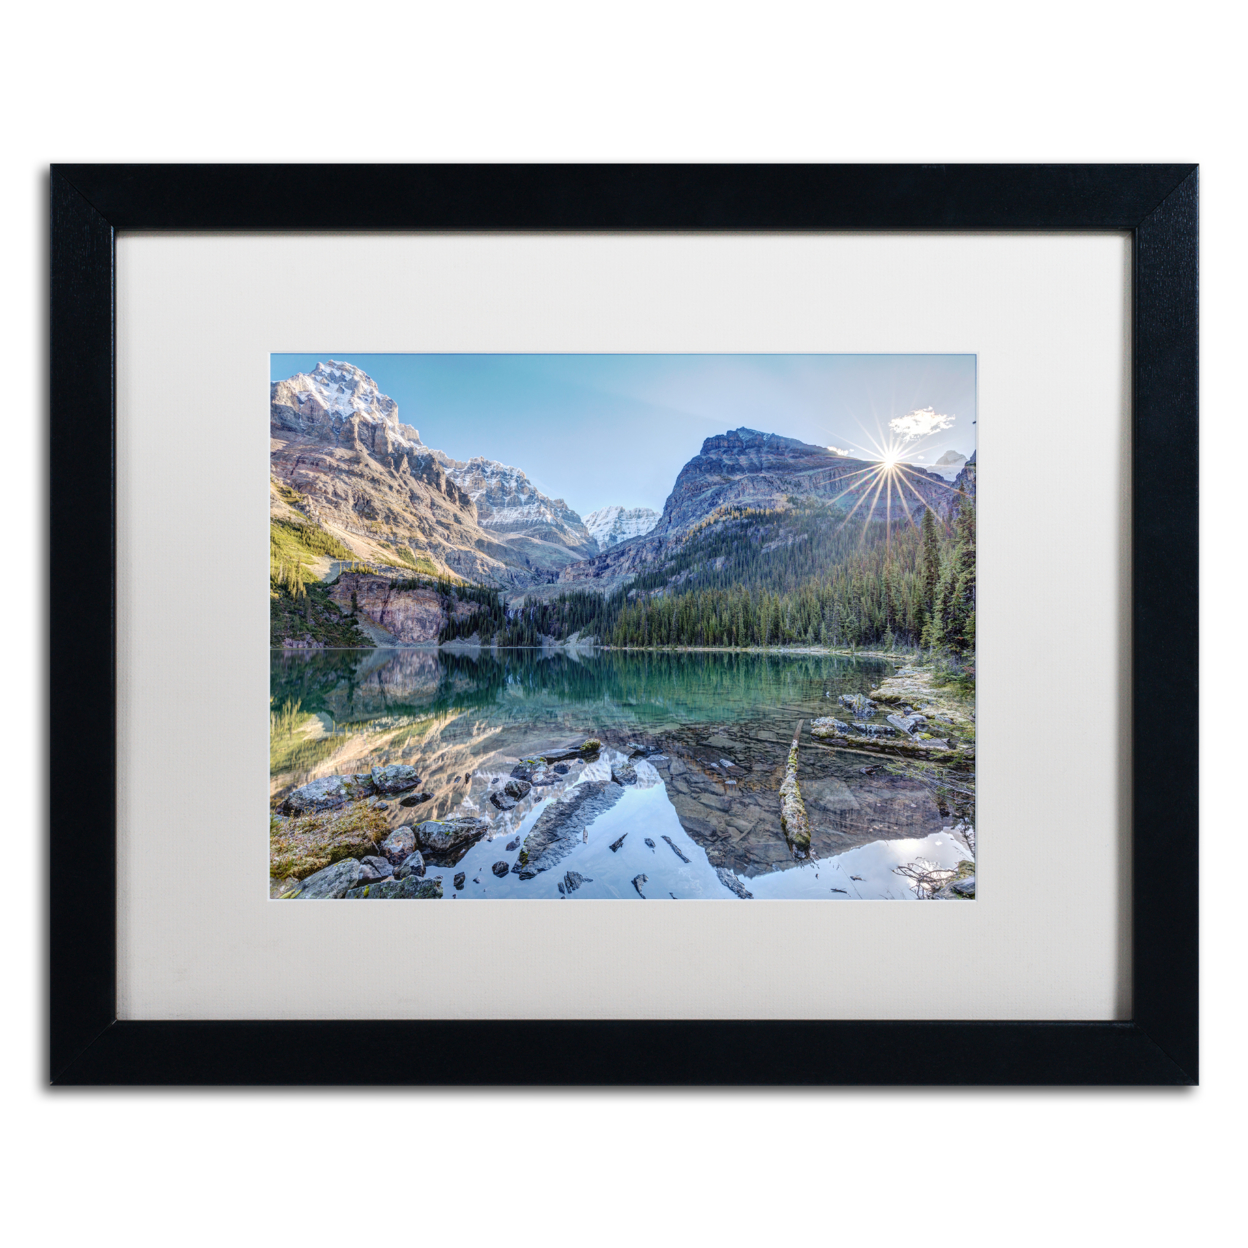 Pierre Leclerc 'Majestic Lake O'Hara' Black Wooden Framed Art 18 X 22 Inches